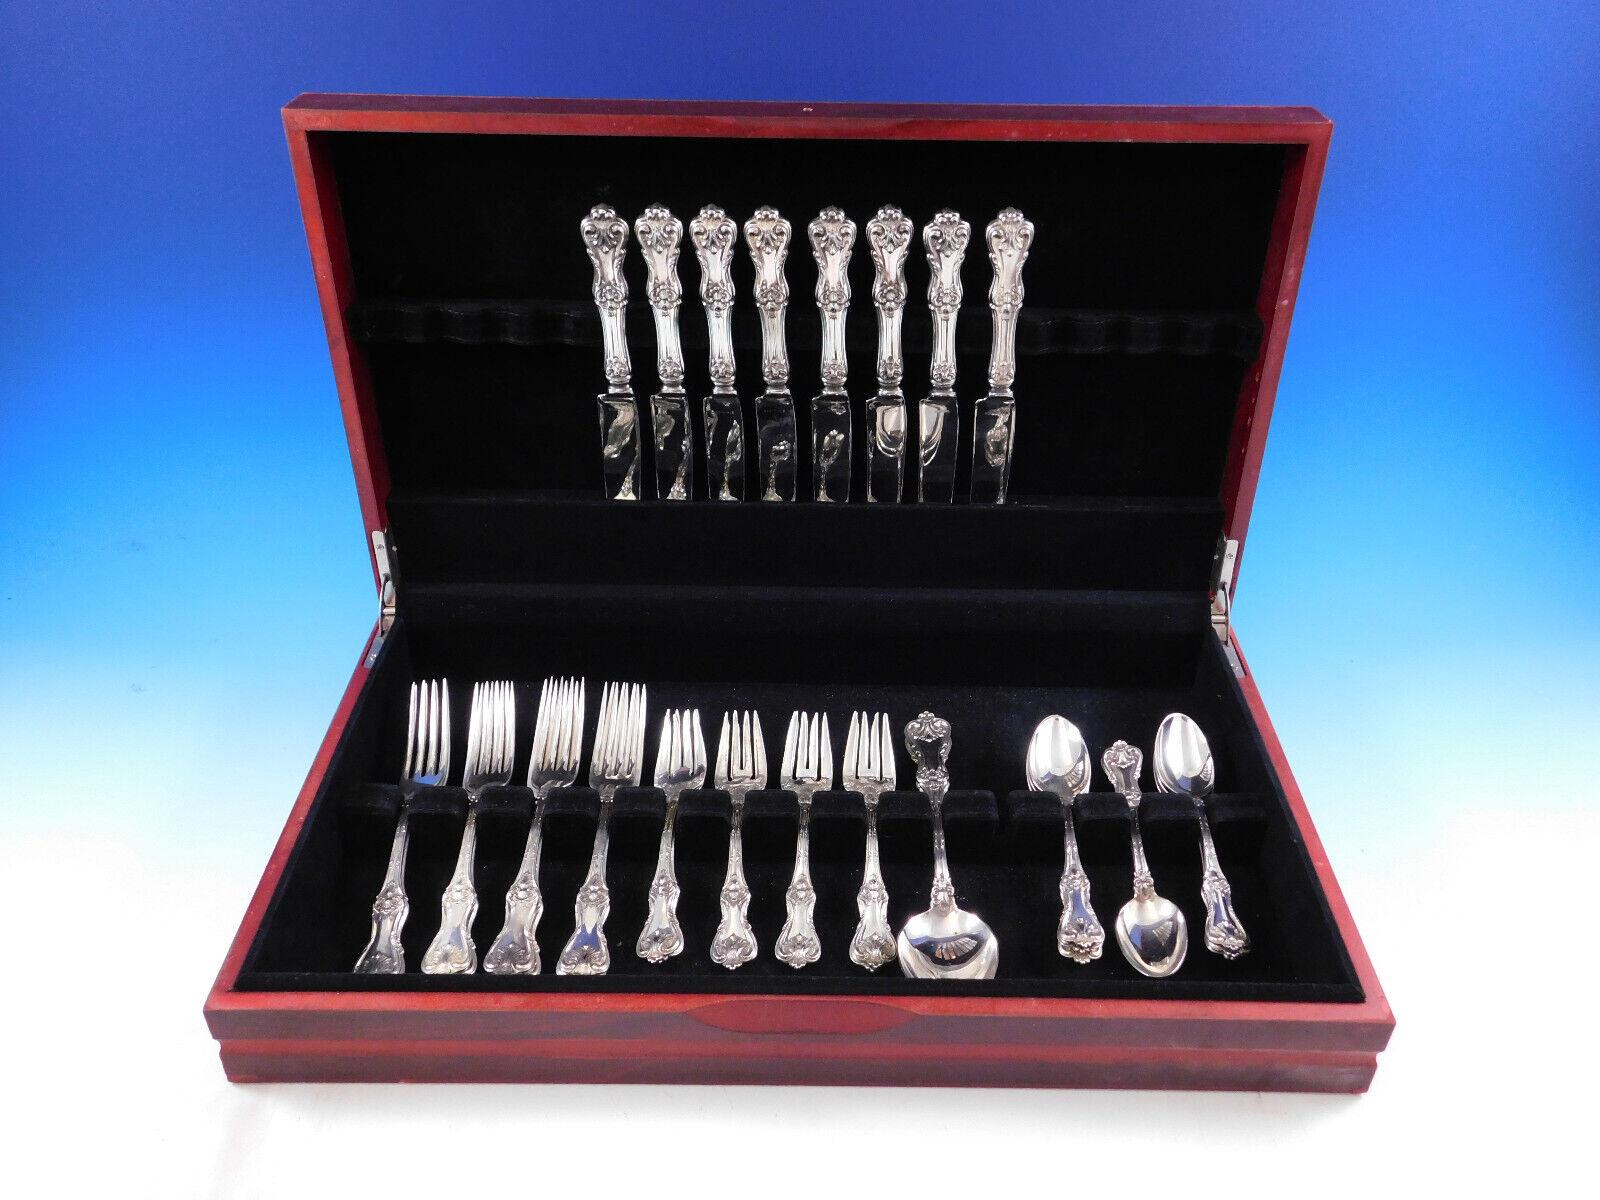 Federal Cotillion, a stately flatware design rich with ornamentation graces this uniquely shaped pattern. Federal Cotillion features intricate shell detailing involving both the stem and the handle. An elegant addition to any table.

Federal